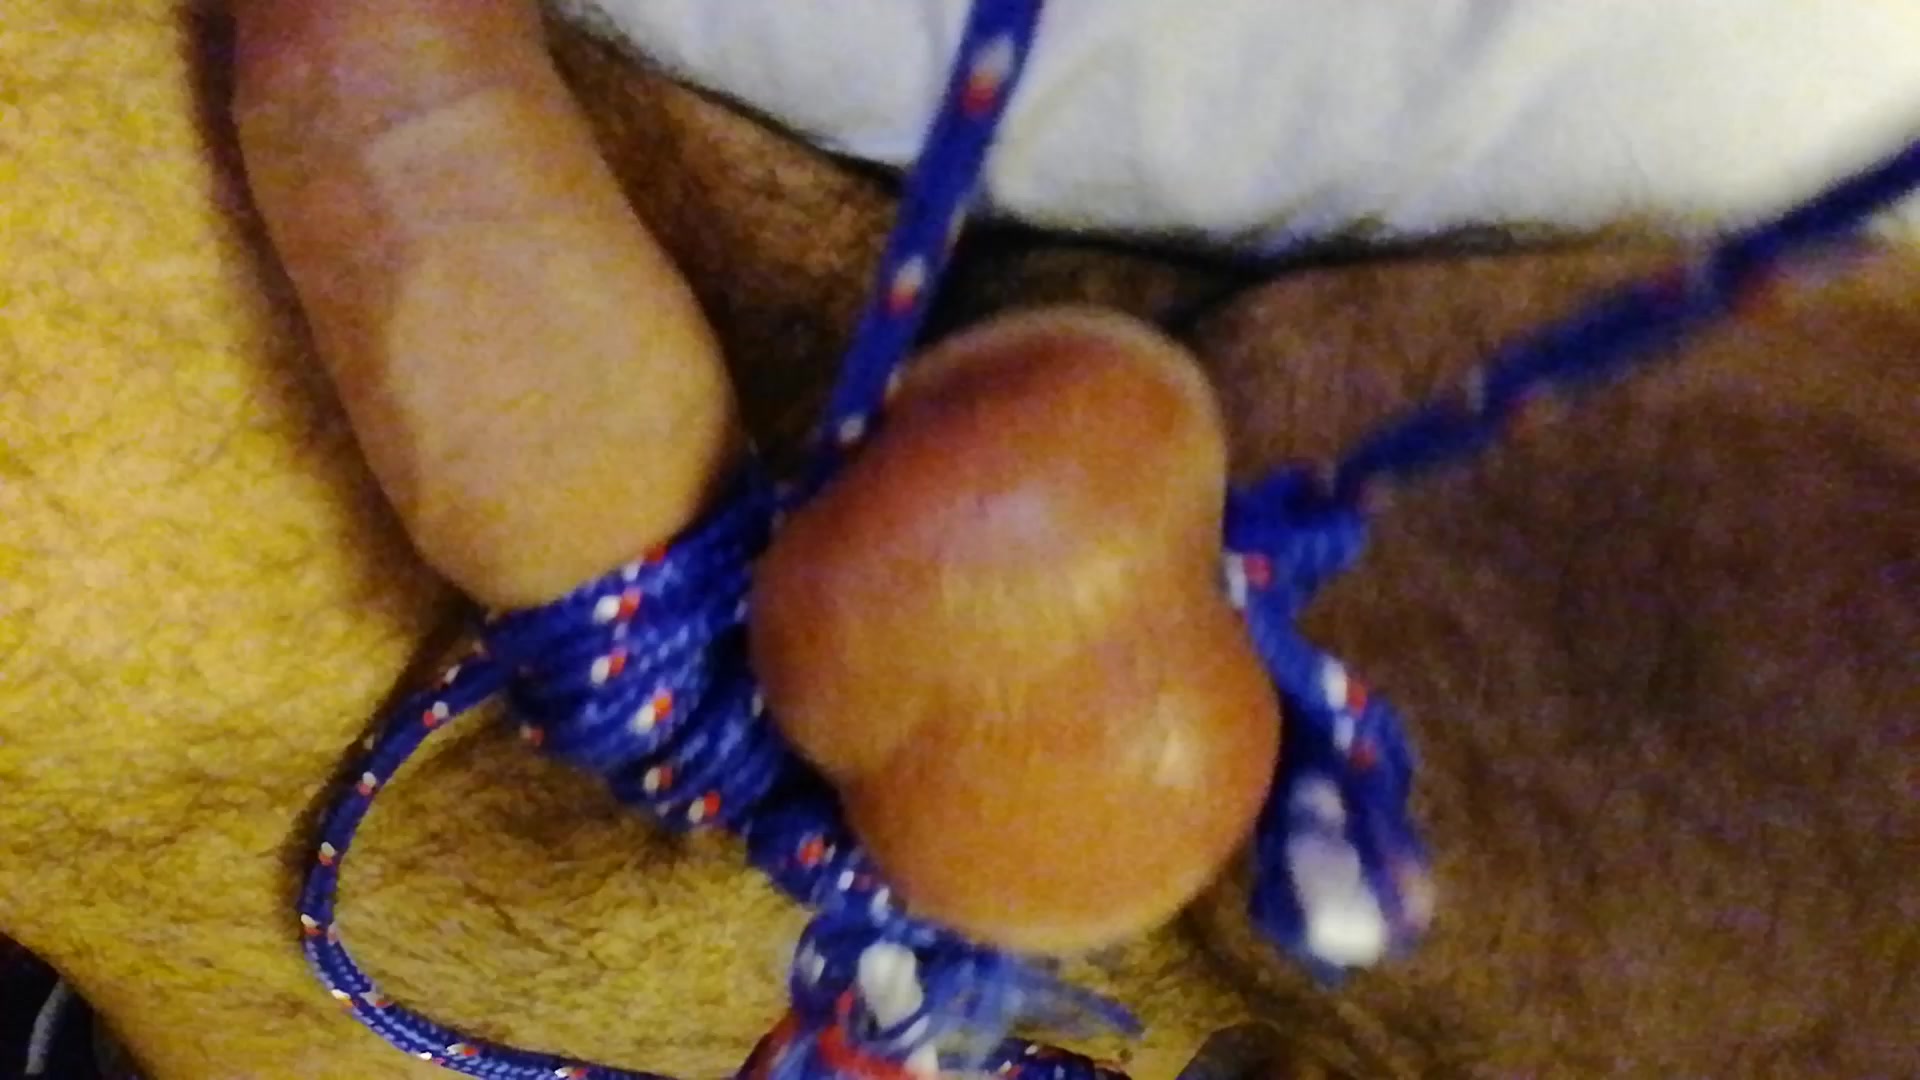 Soft balls busting tied.